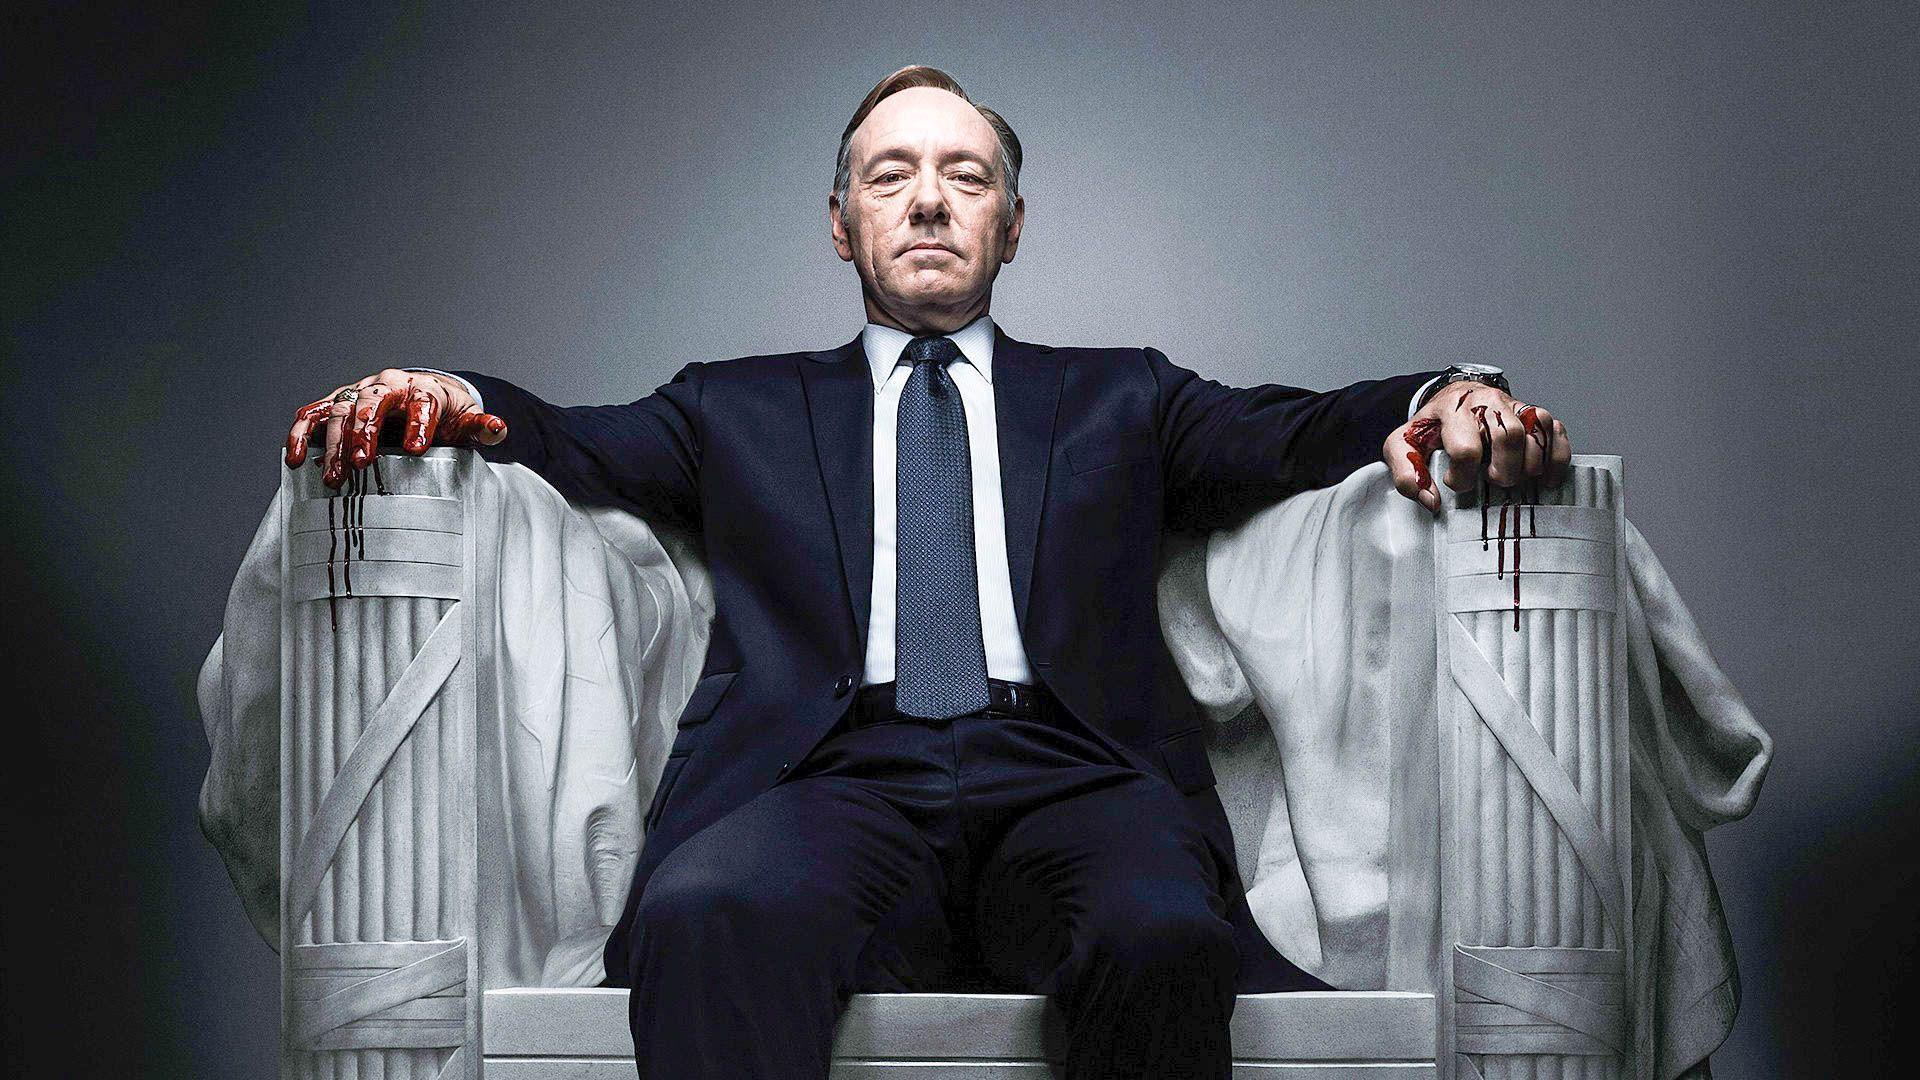 House Of Cards Amazing HD Picture, Image & Wallpaper High